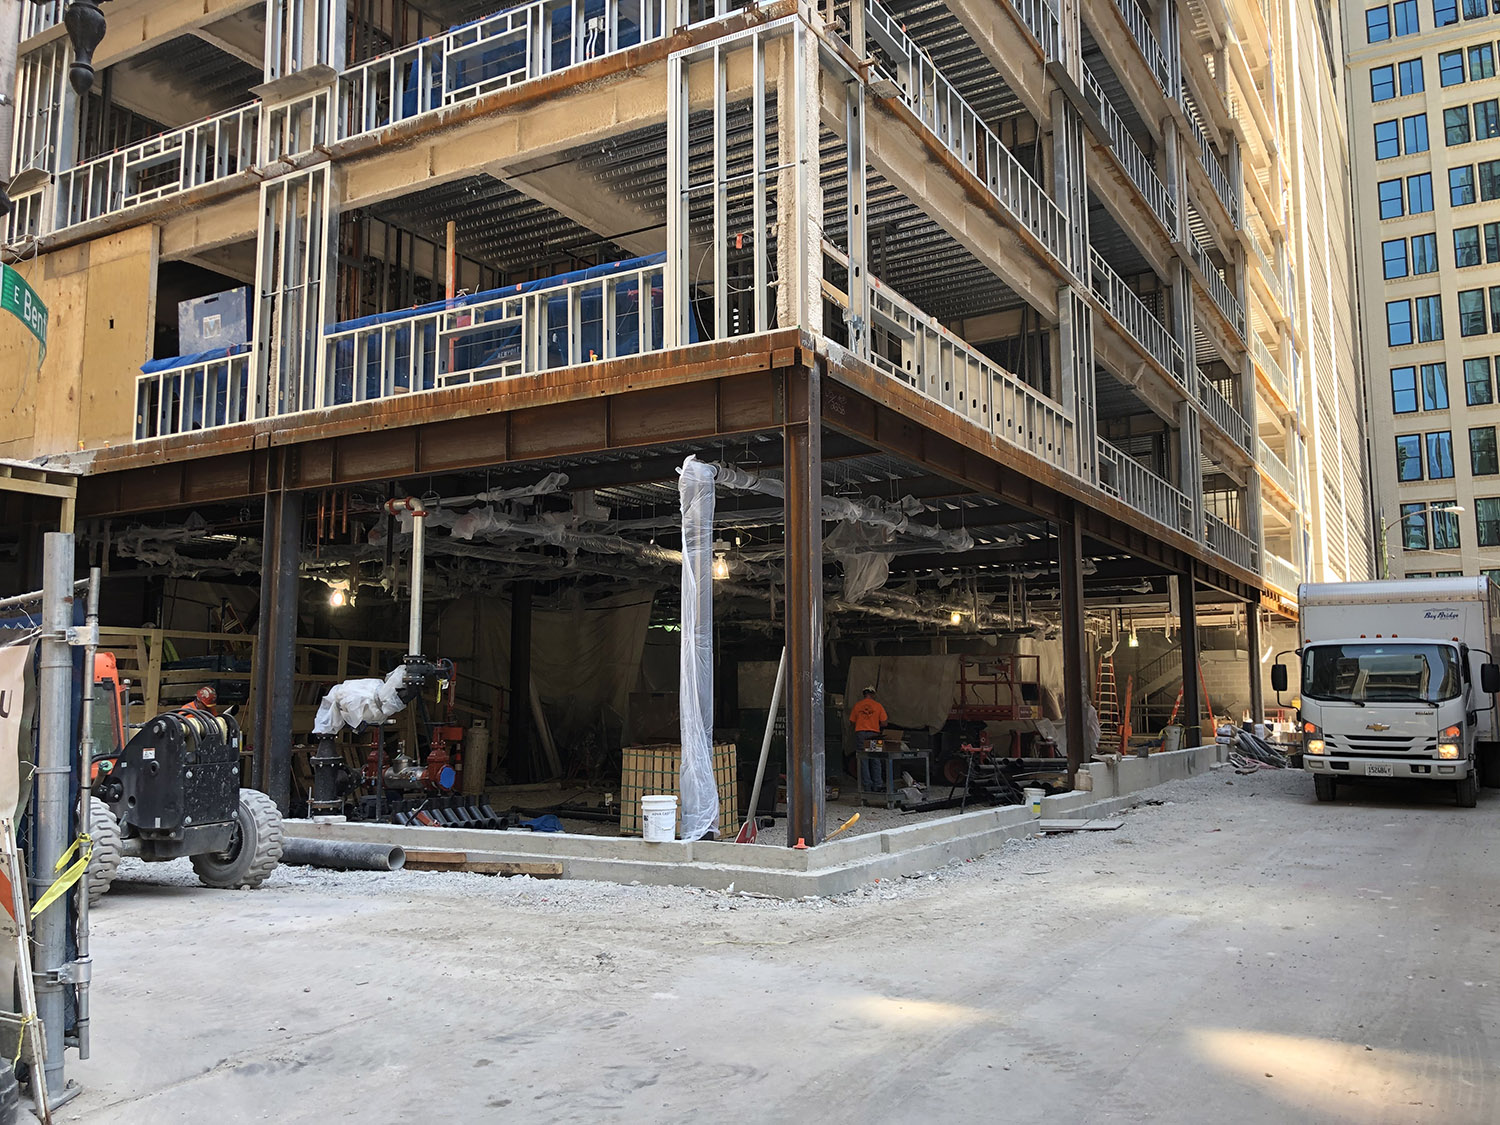 Workers Prep Ground Floor For Possible Fireproofing Spray. Image by Lukas Kugler